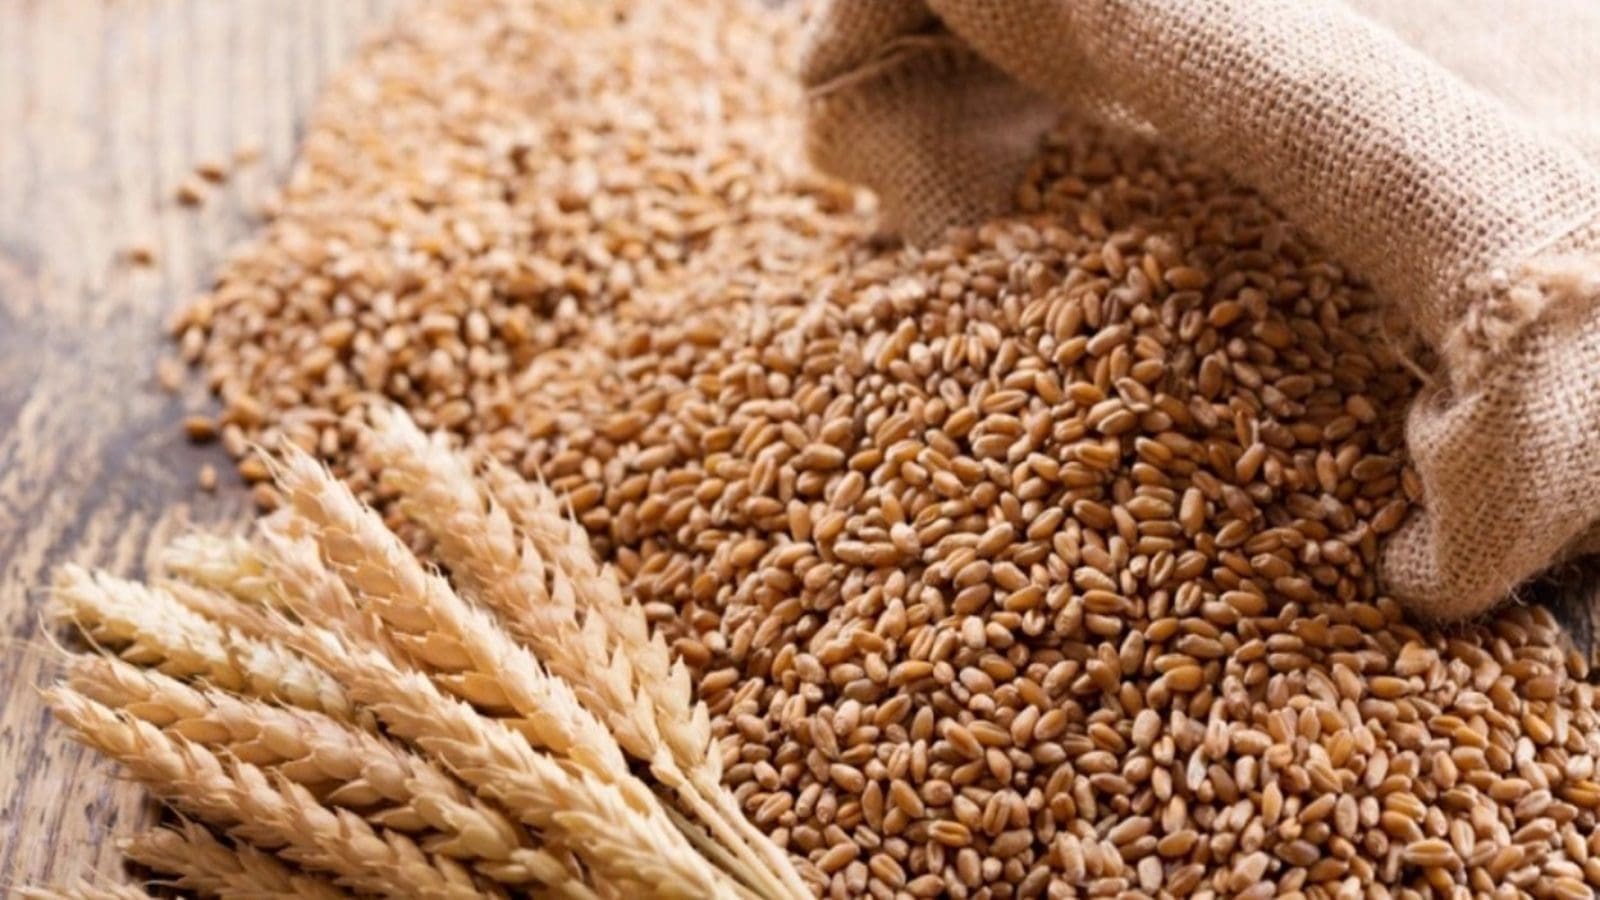 Sudan to import 3.5 million tons of wheat in 2023 to meet demand as local production contracts: FAO